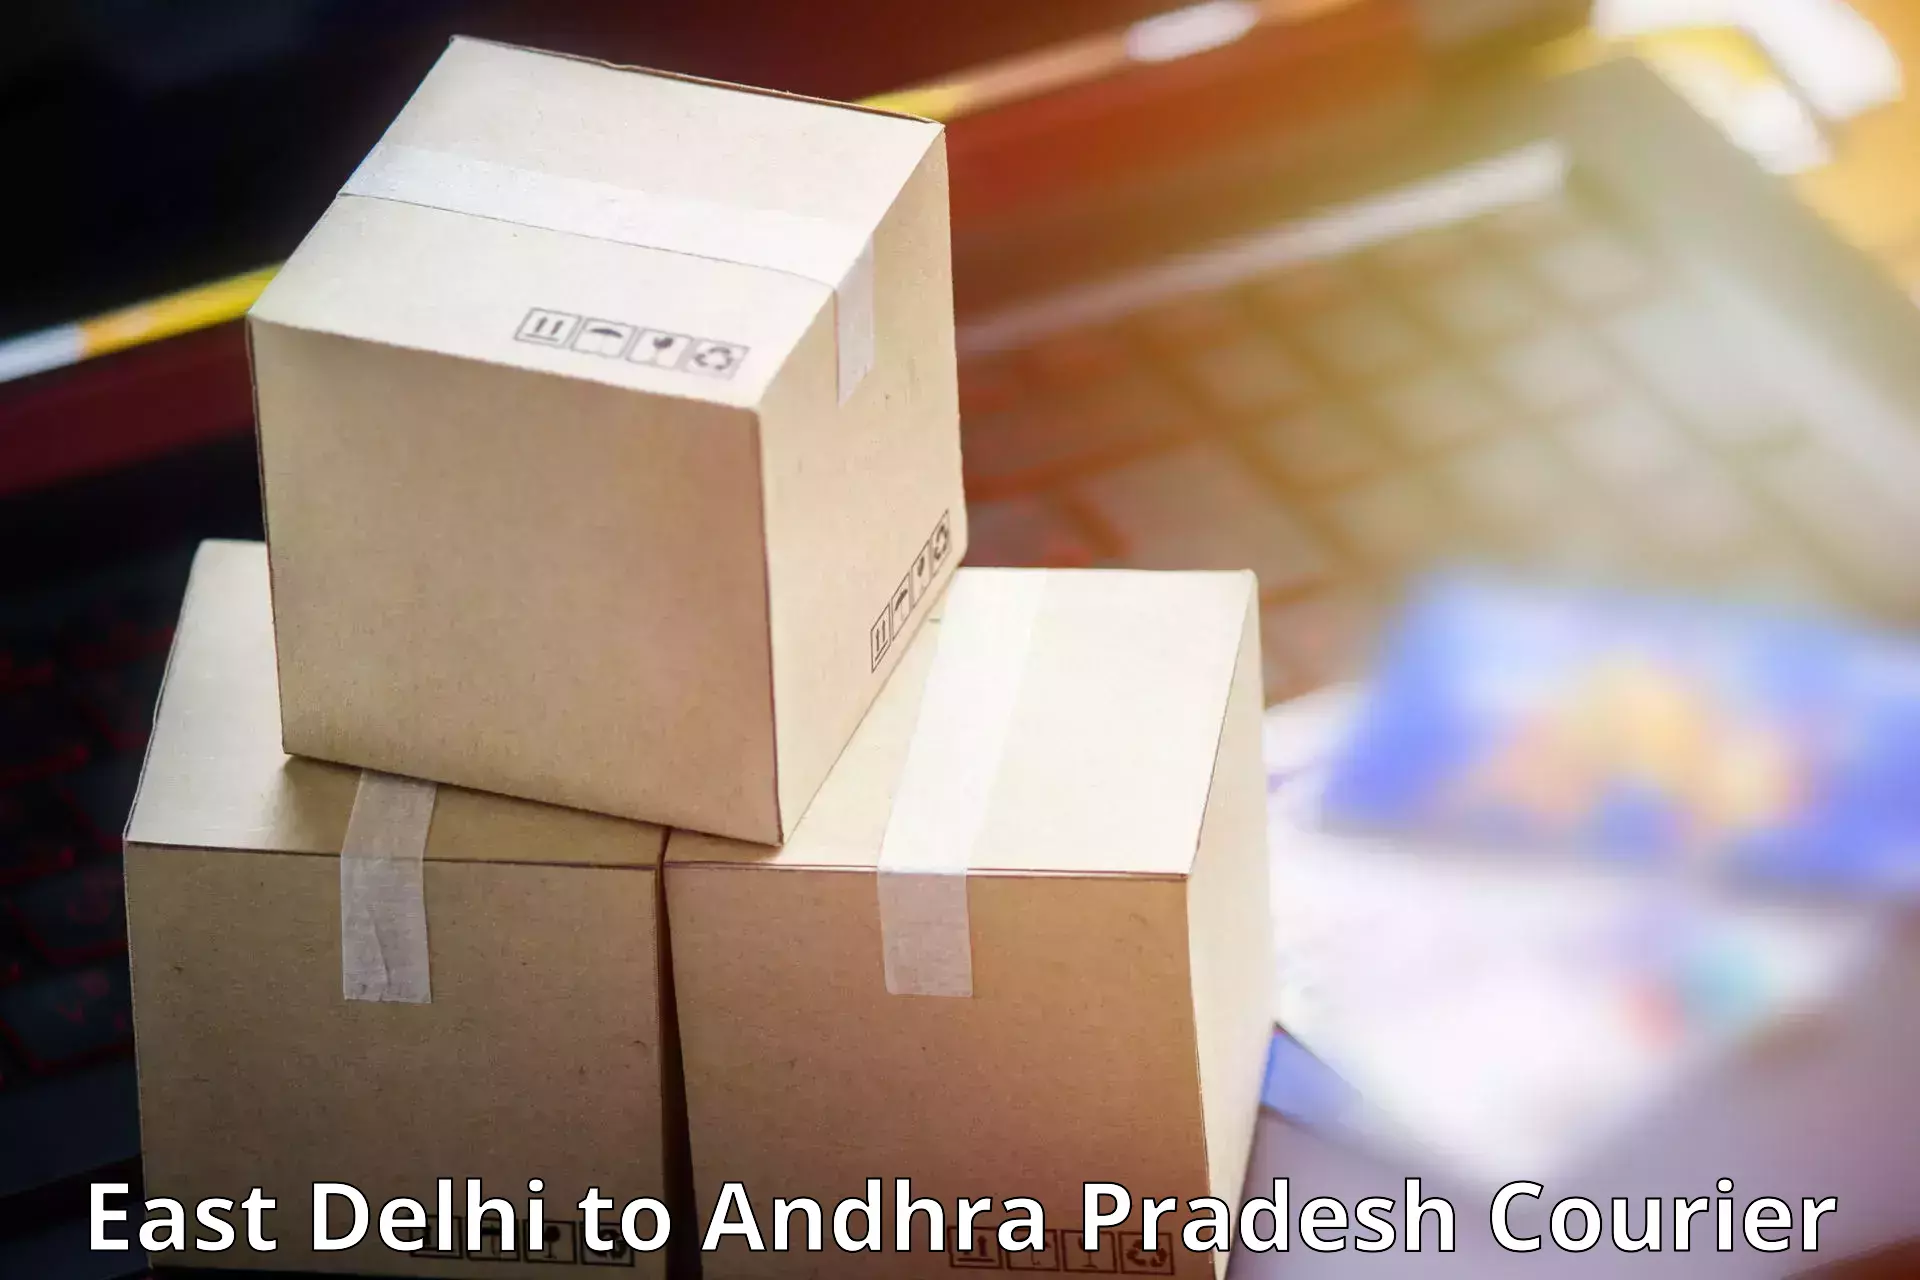 Custom courier packaging East Delhi to Alur